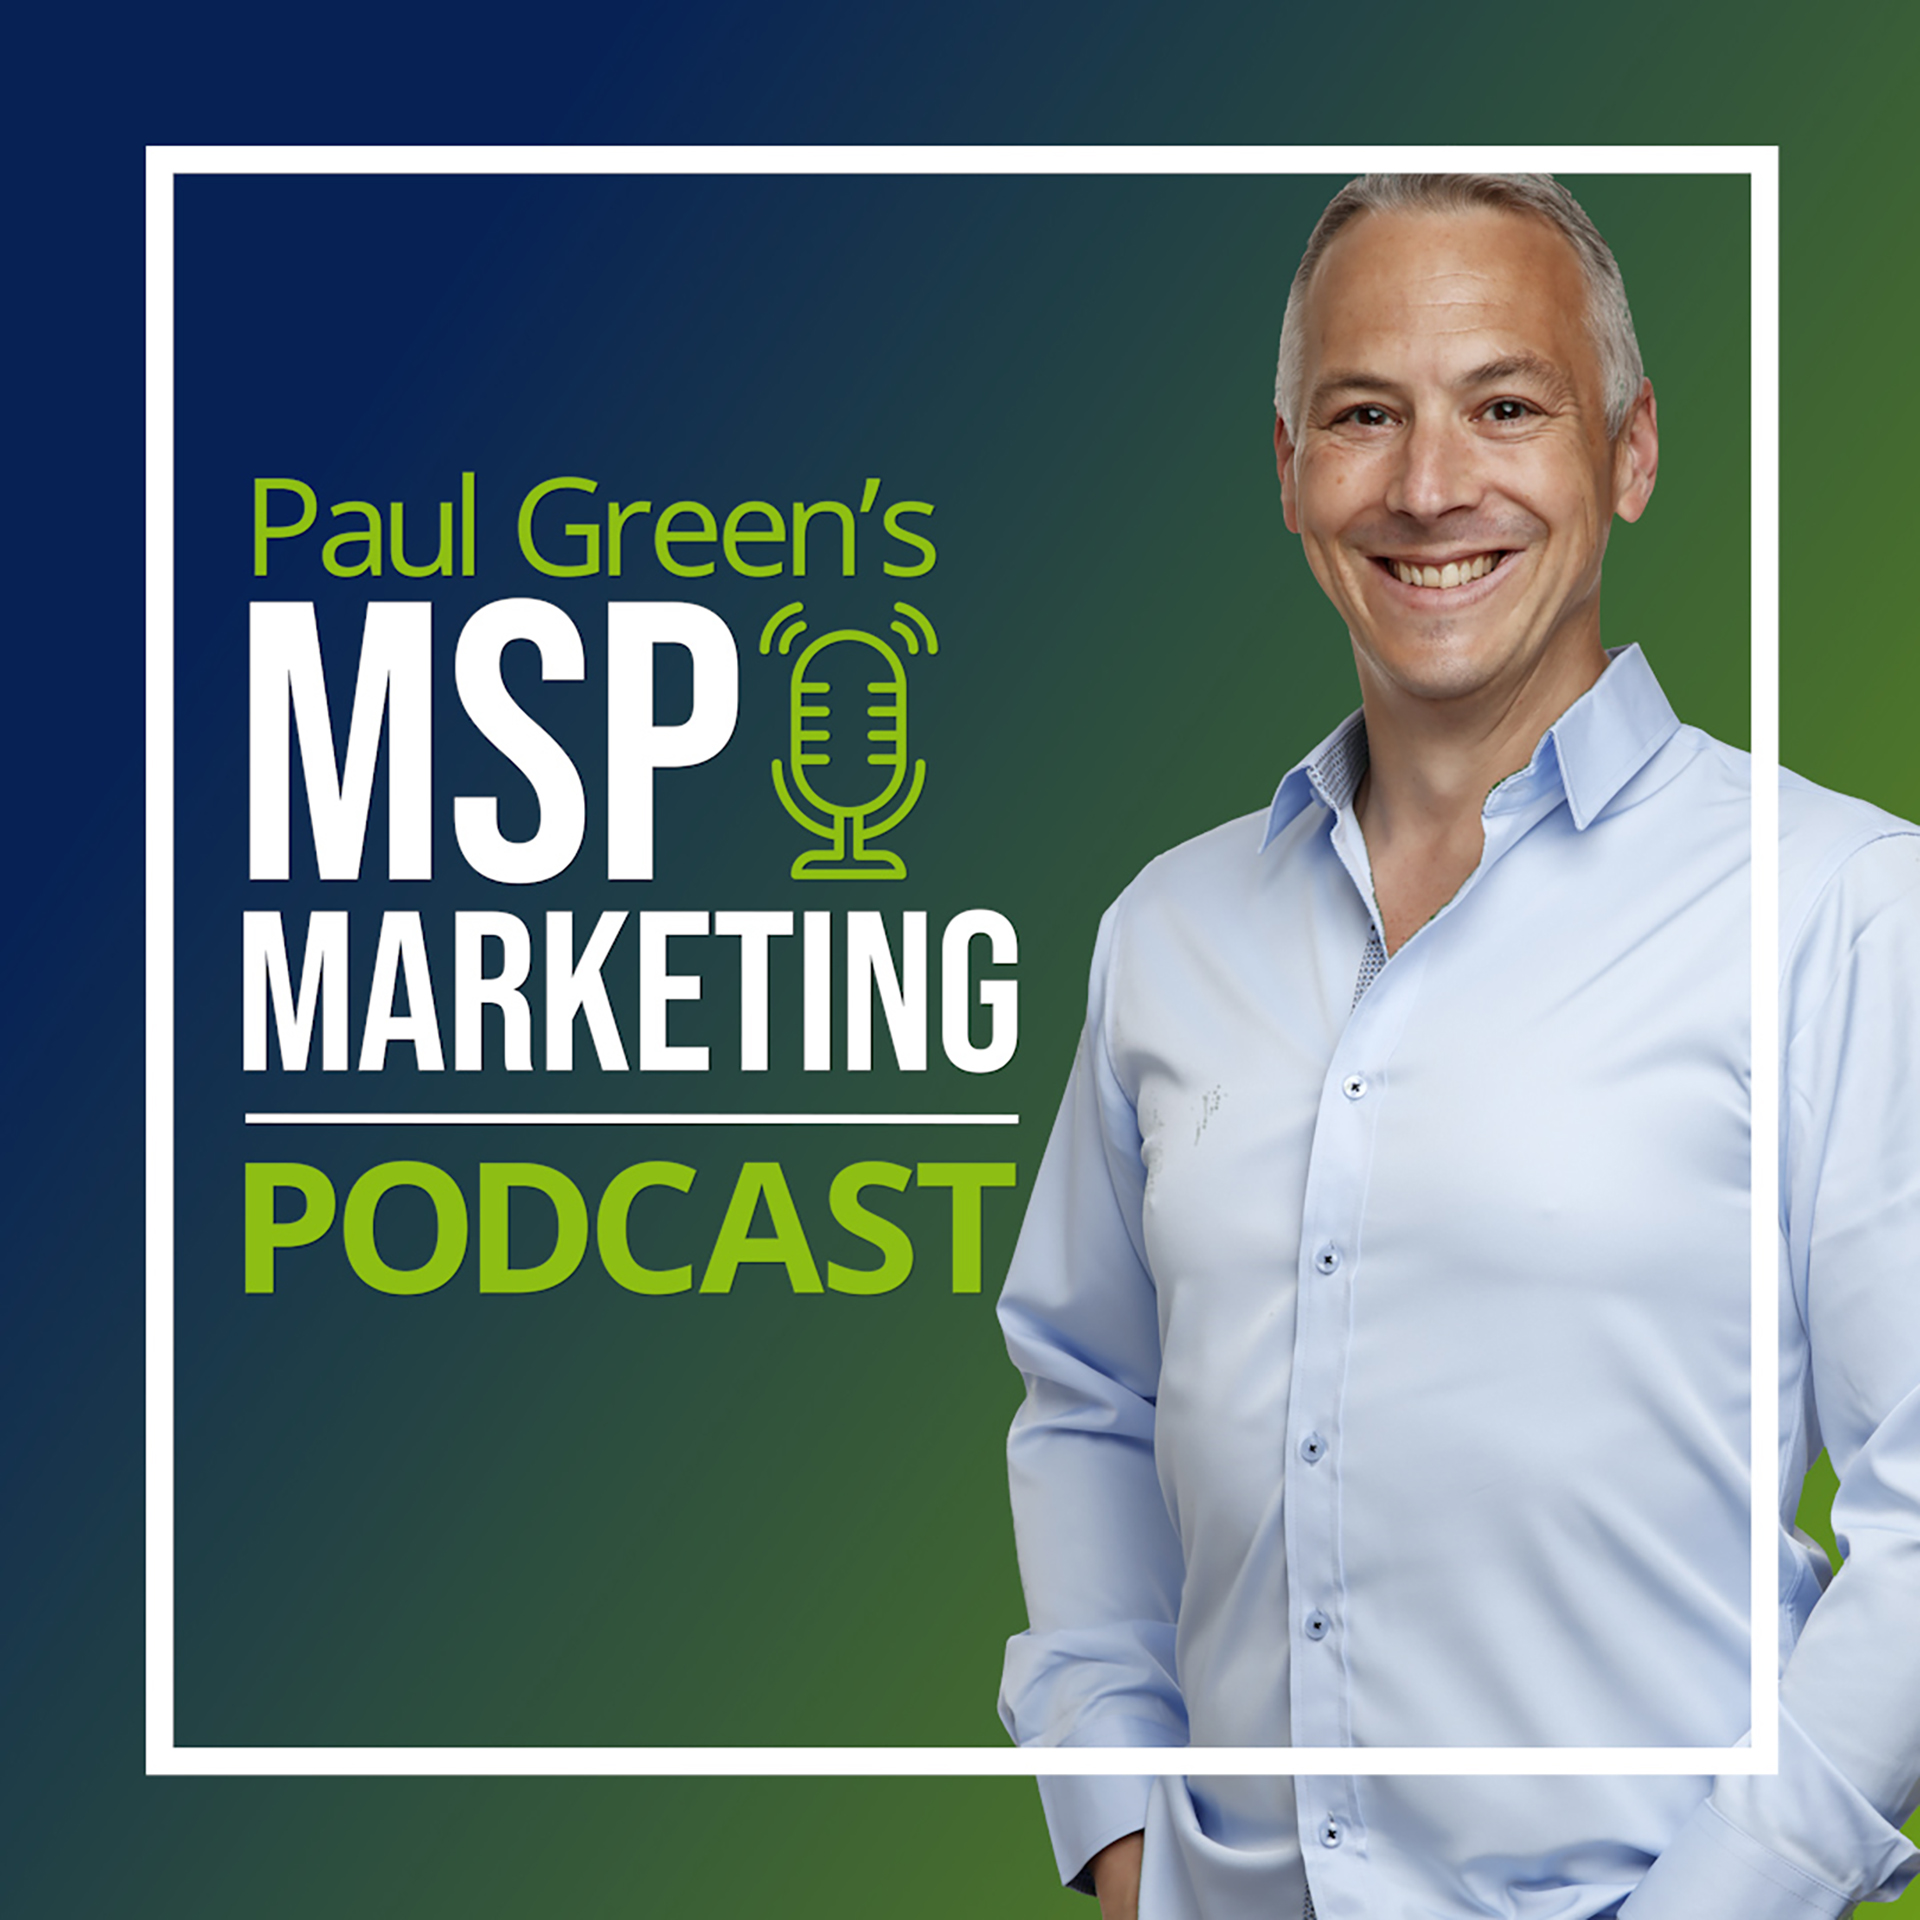 Episode 88: Special: How this MSP built his business